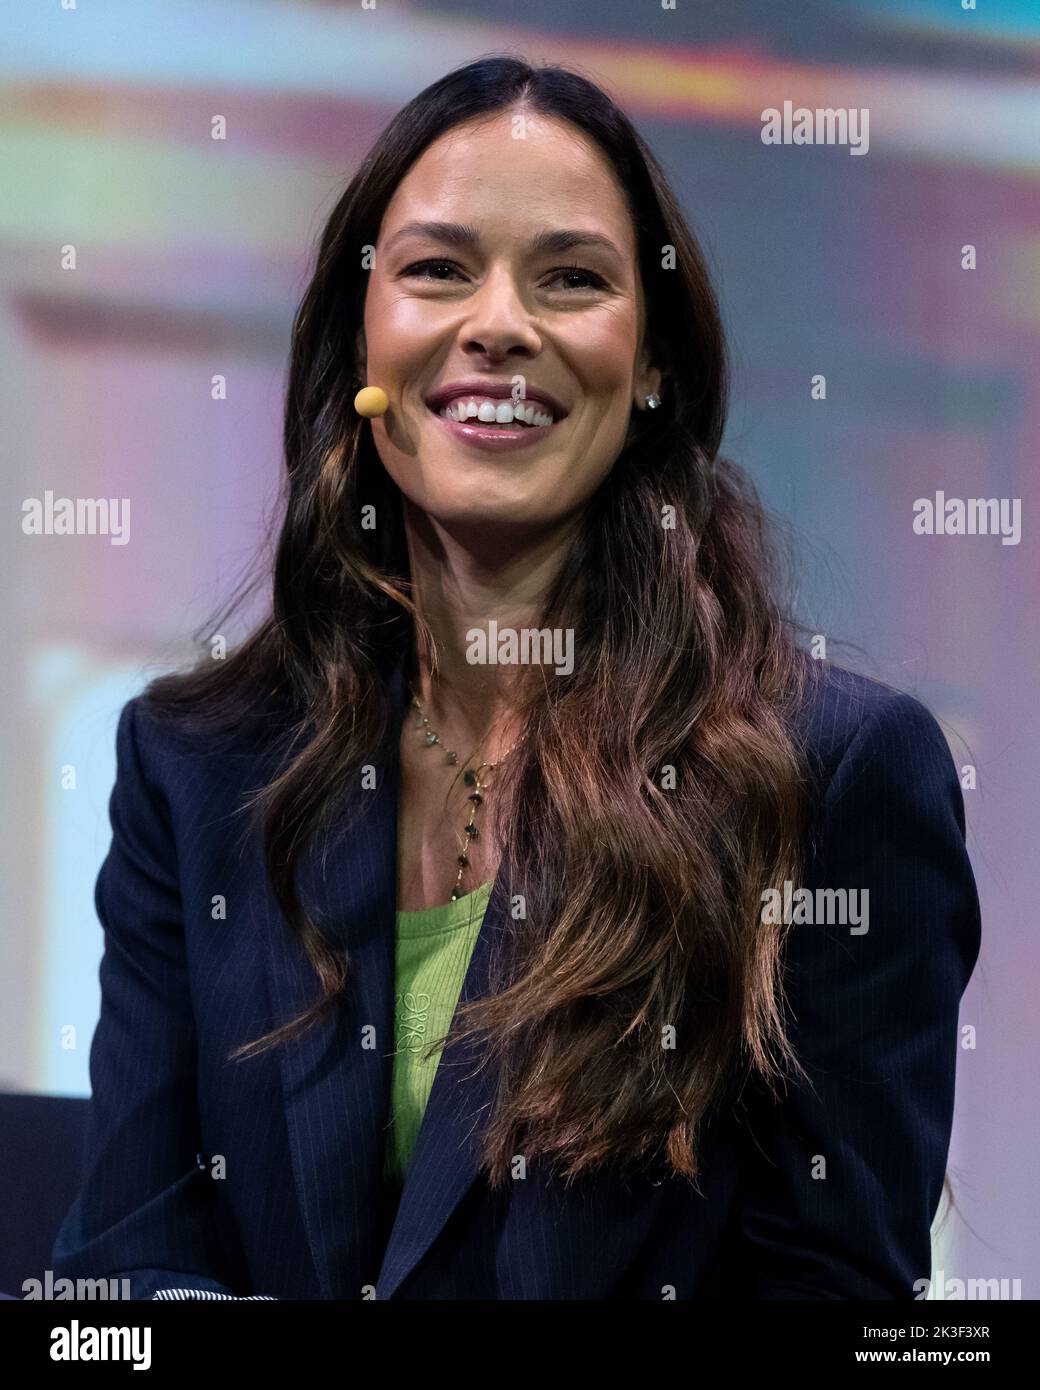 Munich, Germany. 26th Sep, 2022. Ana Ivanovic, former tennis player, is on  stage at the company founder and investor meeting Bits & Pretzels. At Bits  & Pretzels, successful founders talk about their